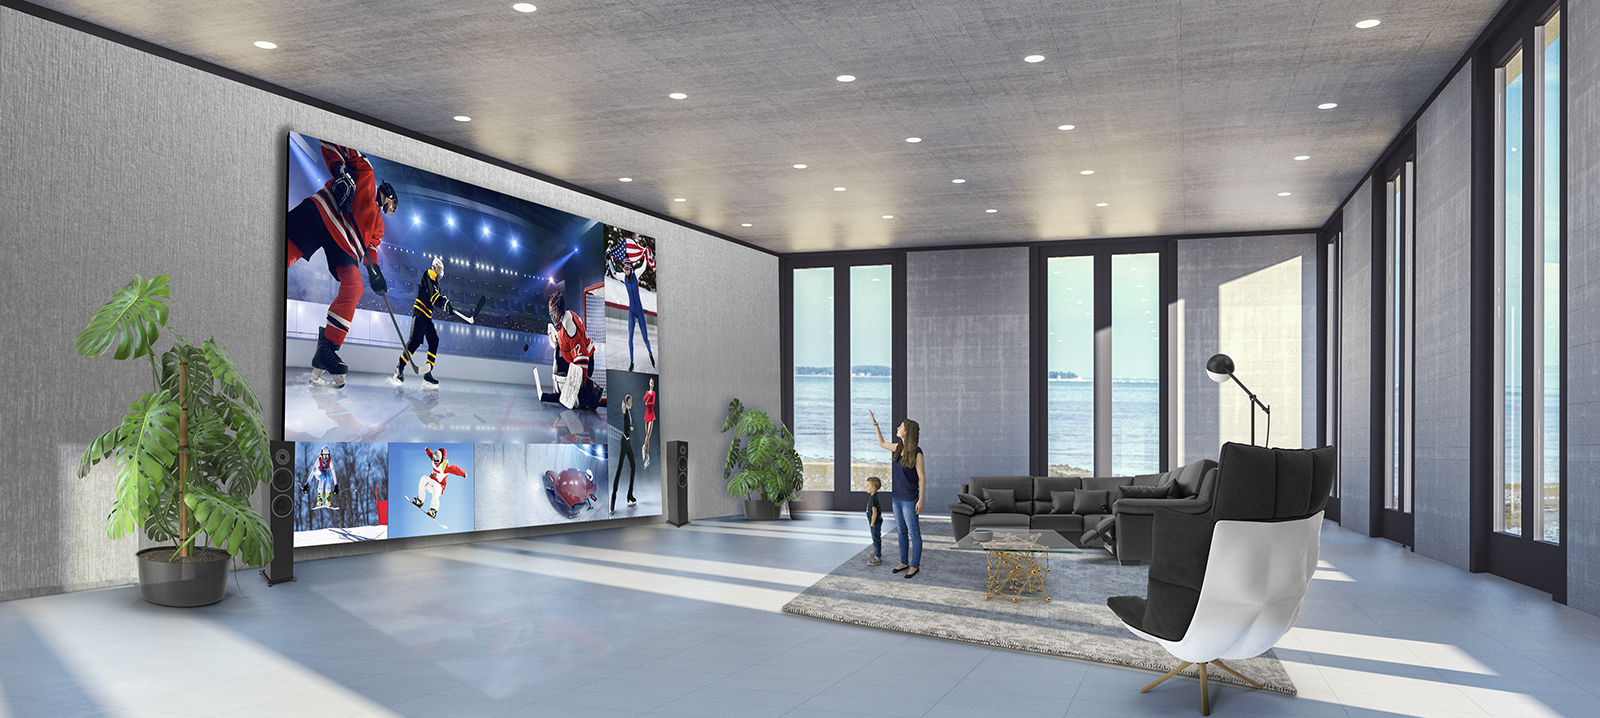 LG DVLED ‘Extreme Home Cinema’ Wall-Sized Display Line Redefines the Luxury Home Theater Experience